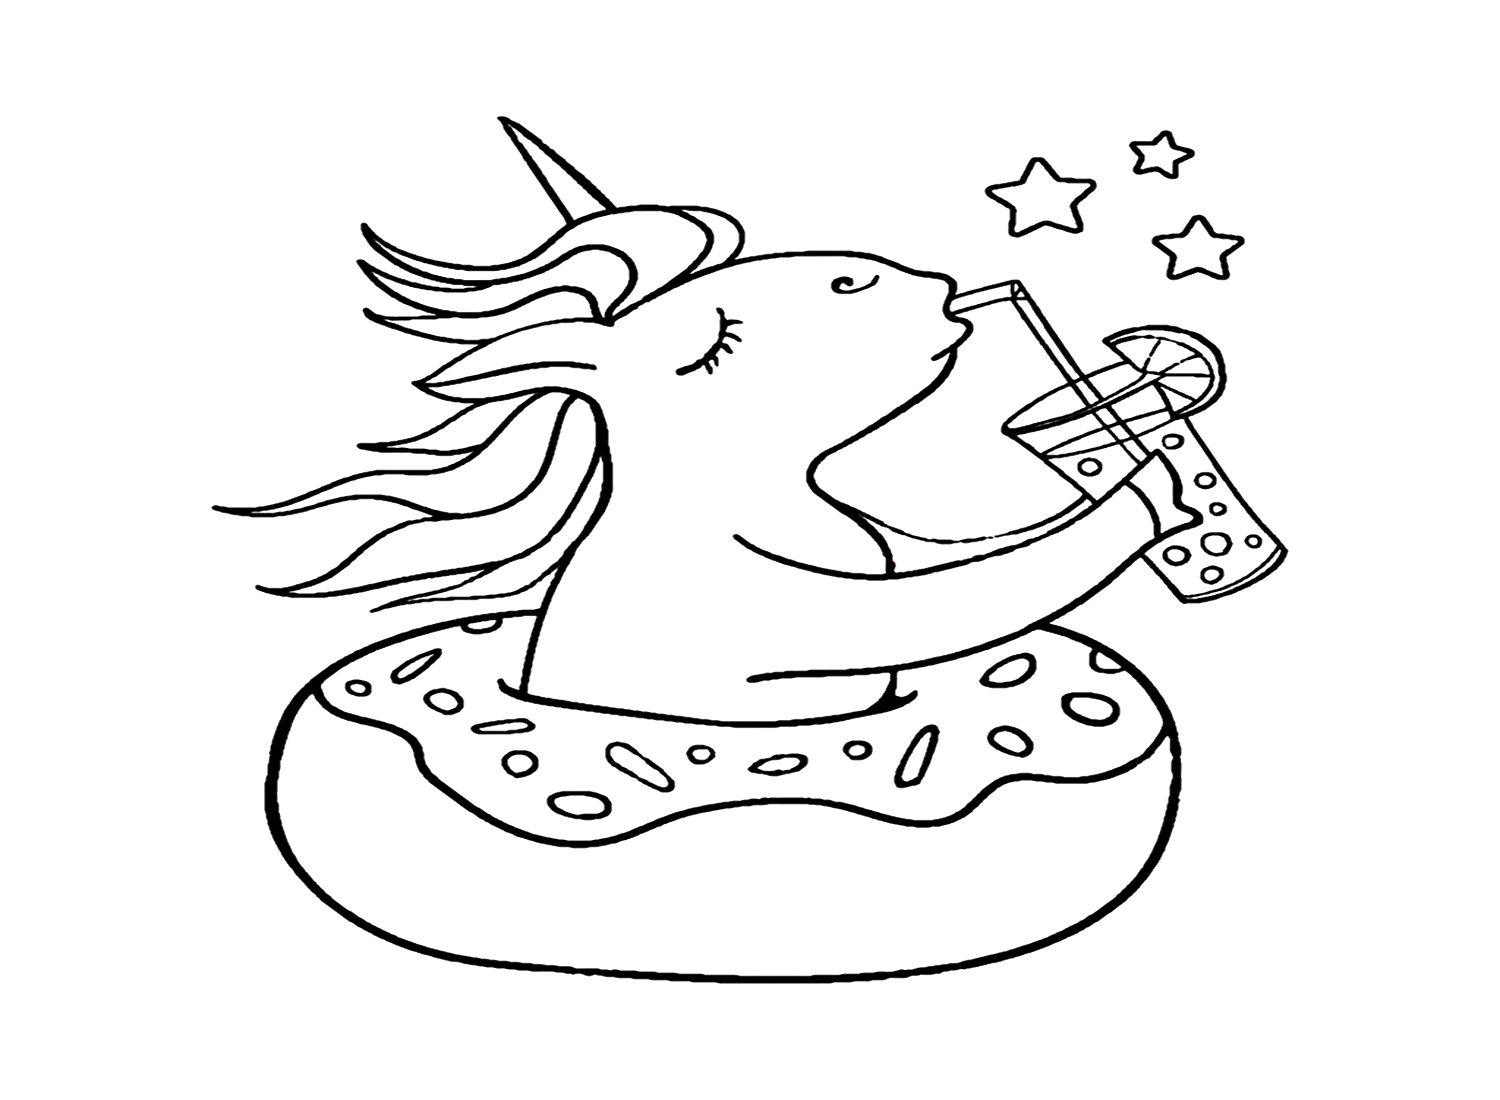 Donut Unicorn Coloring Page